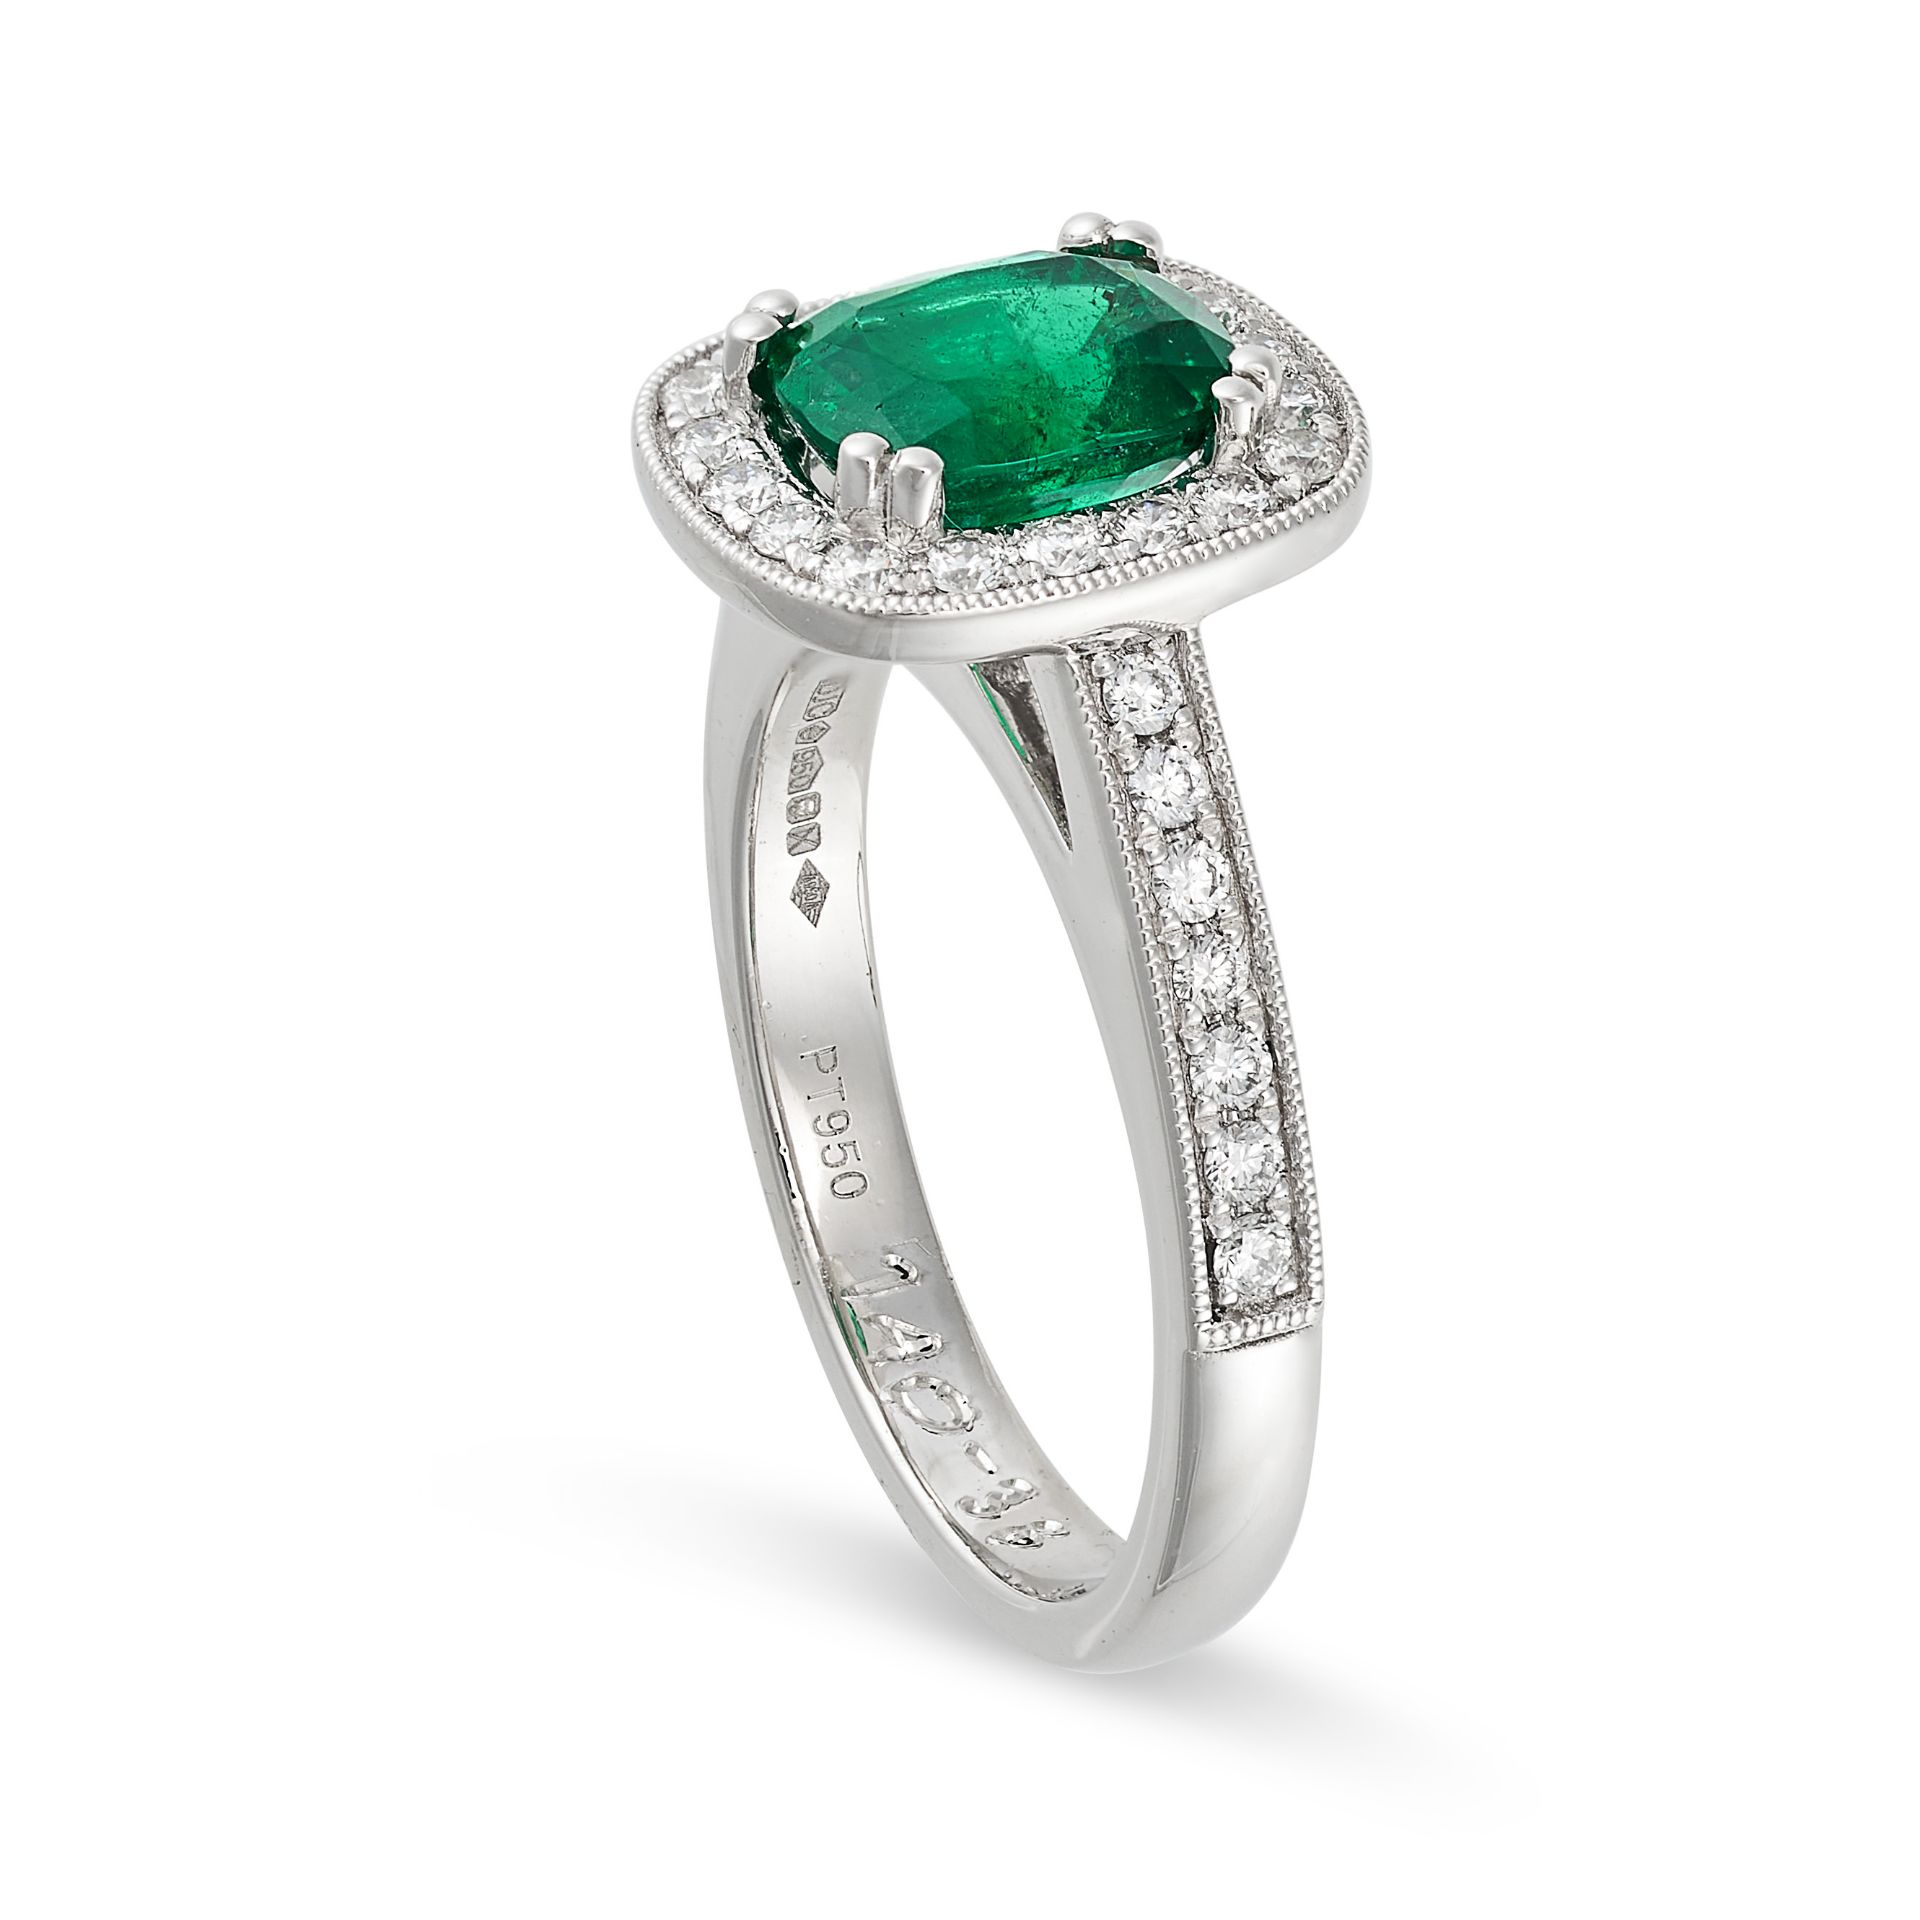 AN EMERALD AND DIAMOND CLUSTER RING in platinum, set with a cushion cut emerald of 1.40 carats to... - Image 2 of 2